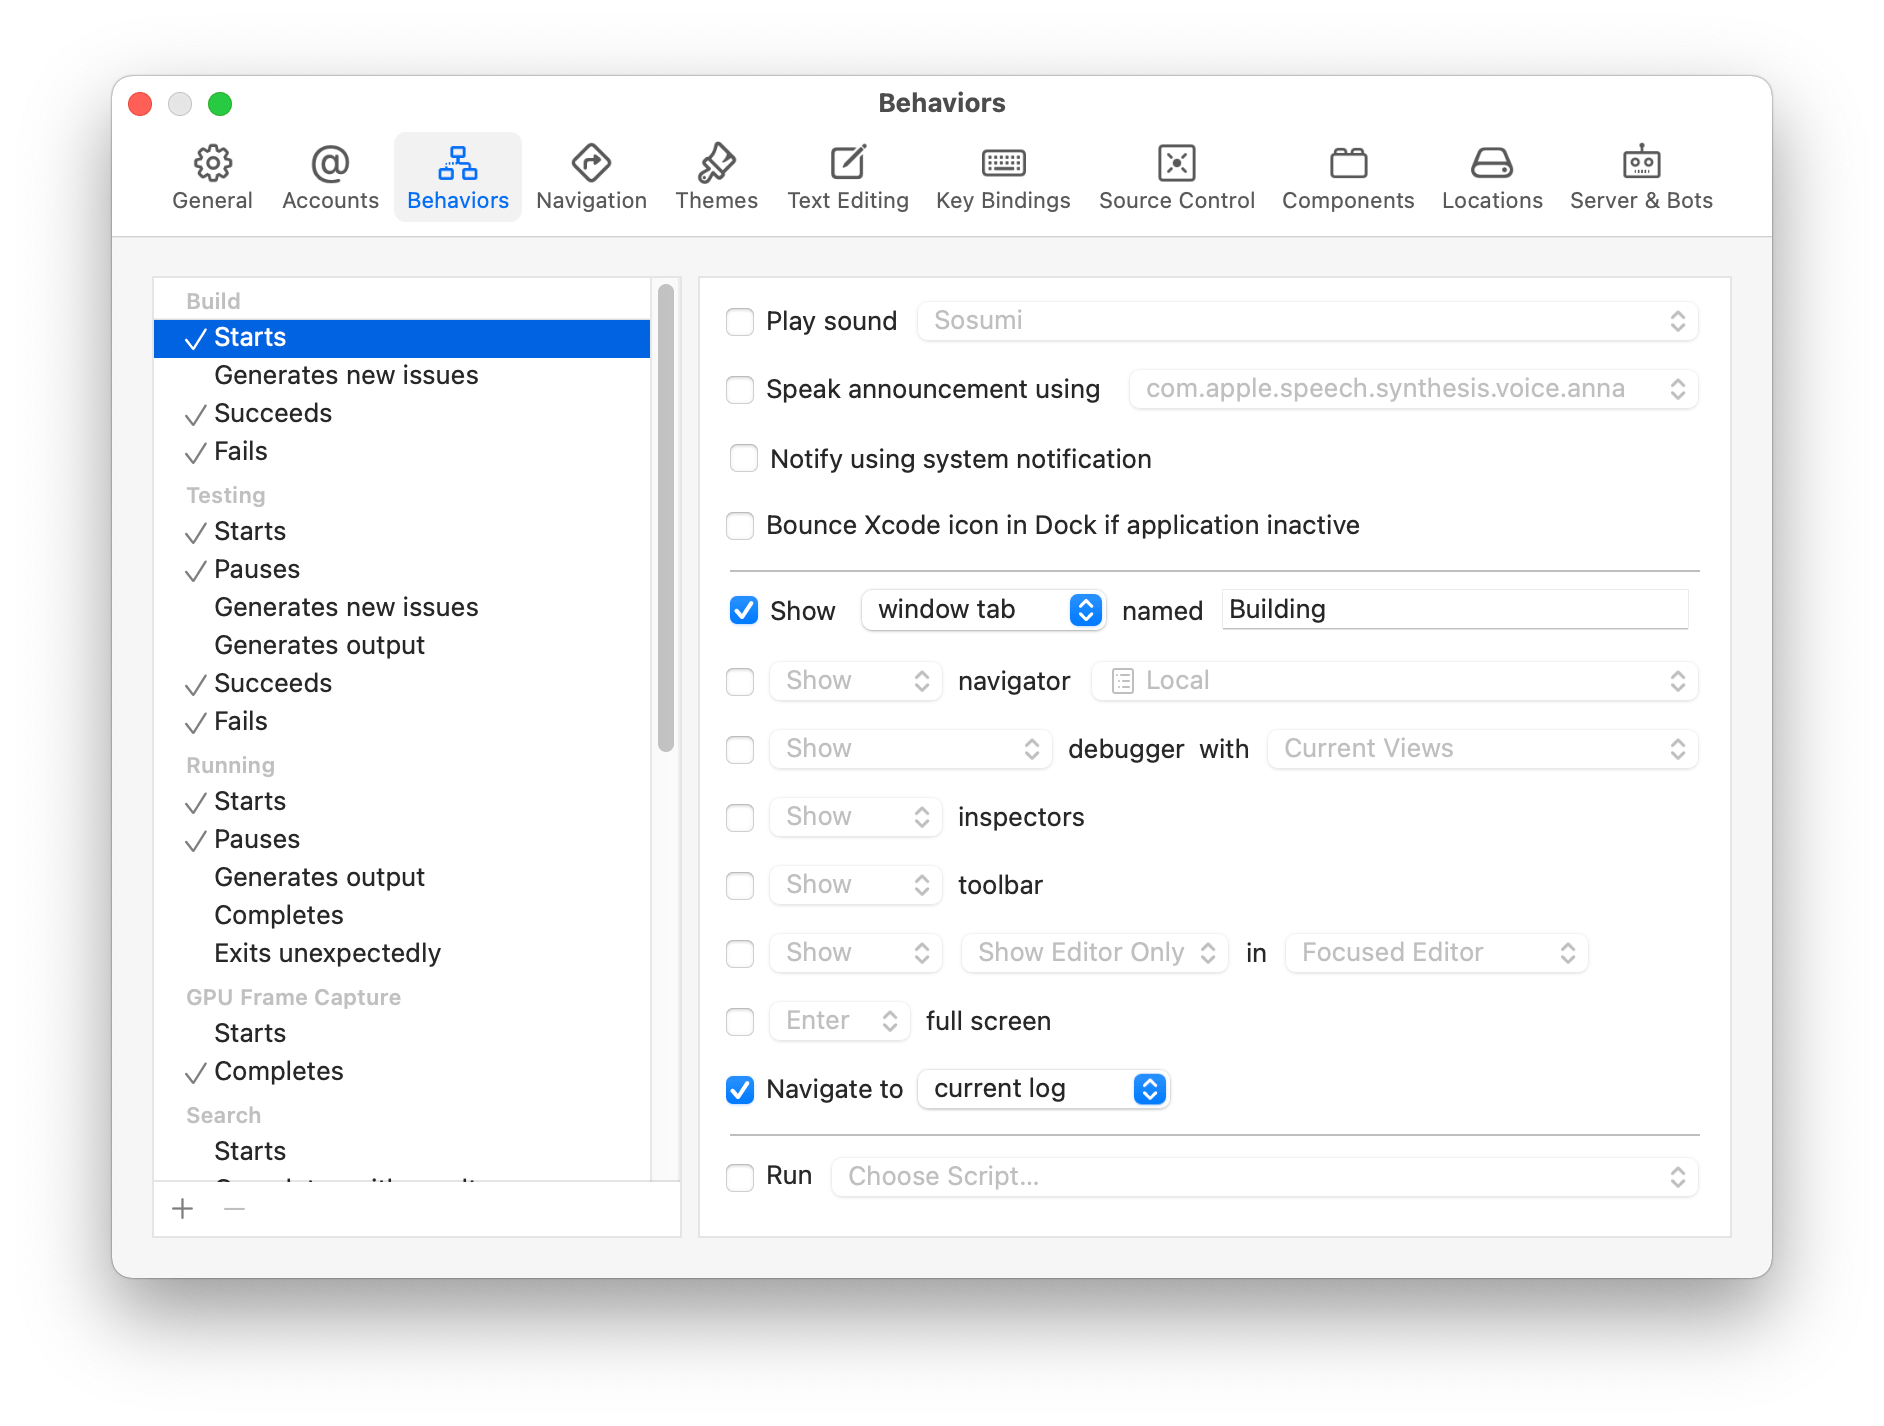 Xcode’s Behaviors Preferences: When the build starts, show the window tab named “Building” and navigate to the current log